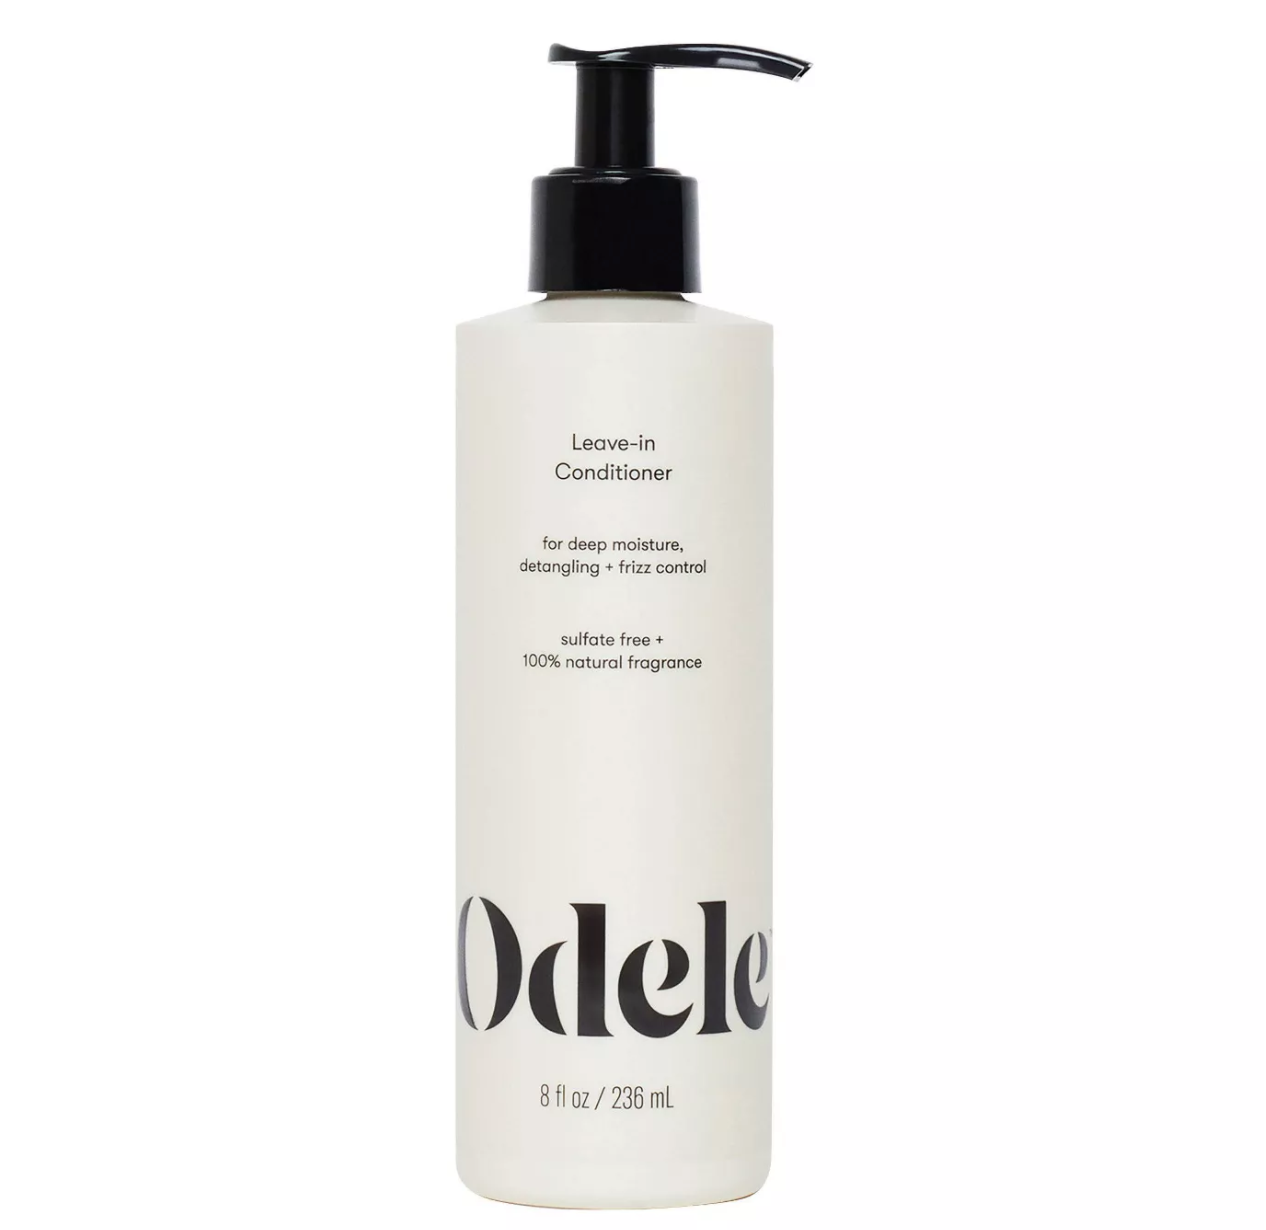 Odele Leave-In Conditioner